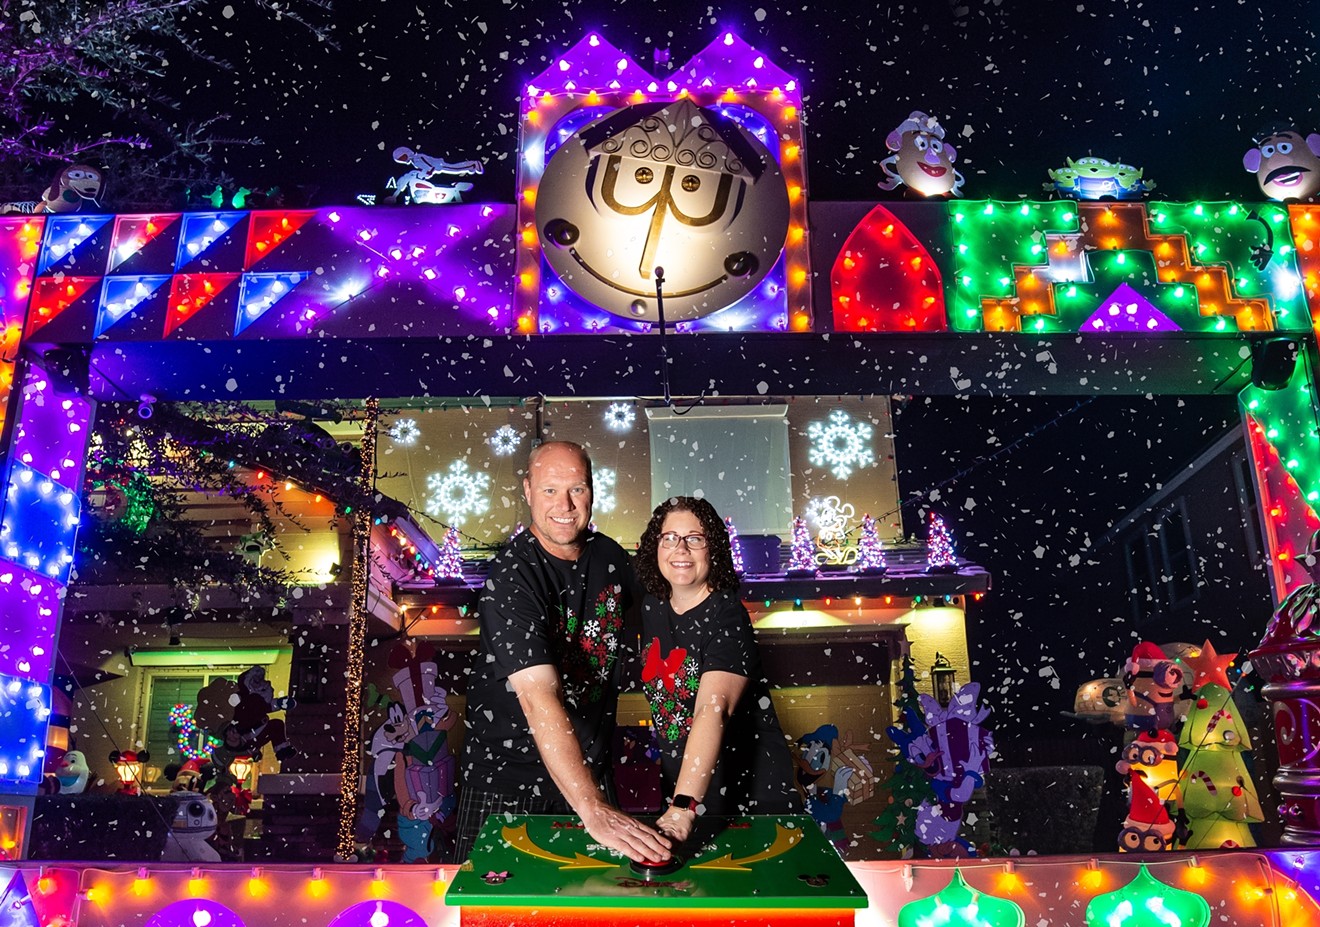 Mike and Stacie Parsons of Mesa and their over-the-top holiday lights display.